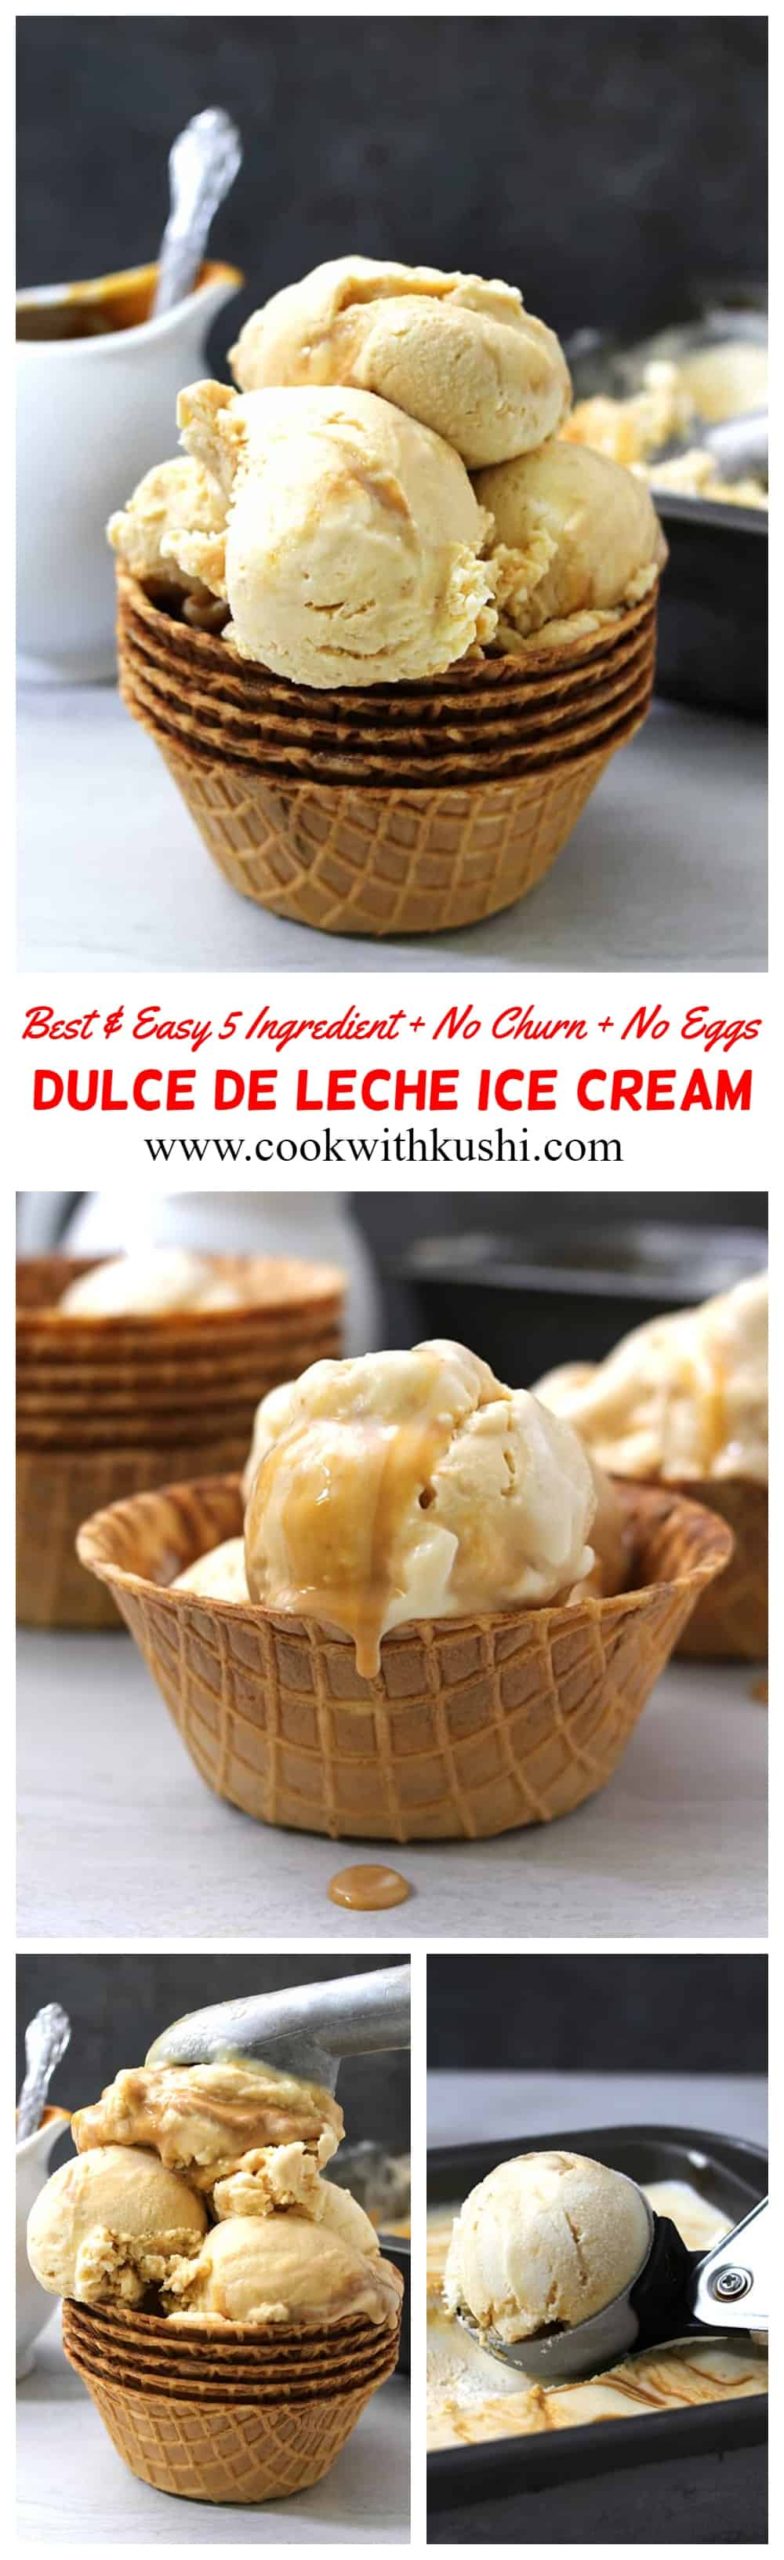 Dulce De Leche Ice Cream is a rich, creamy, smooth, and an insanely delightful treat with combination of caramel and cream that you should definitely try during this summer! This is probably the best and tastiest way possible to cool down yourself this summer. #haagendazs #caramelicecream #homemade #Nochurn #Noeggs #summerdesserts #softicecream #dulcedeleche #4thofjuly